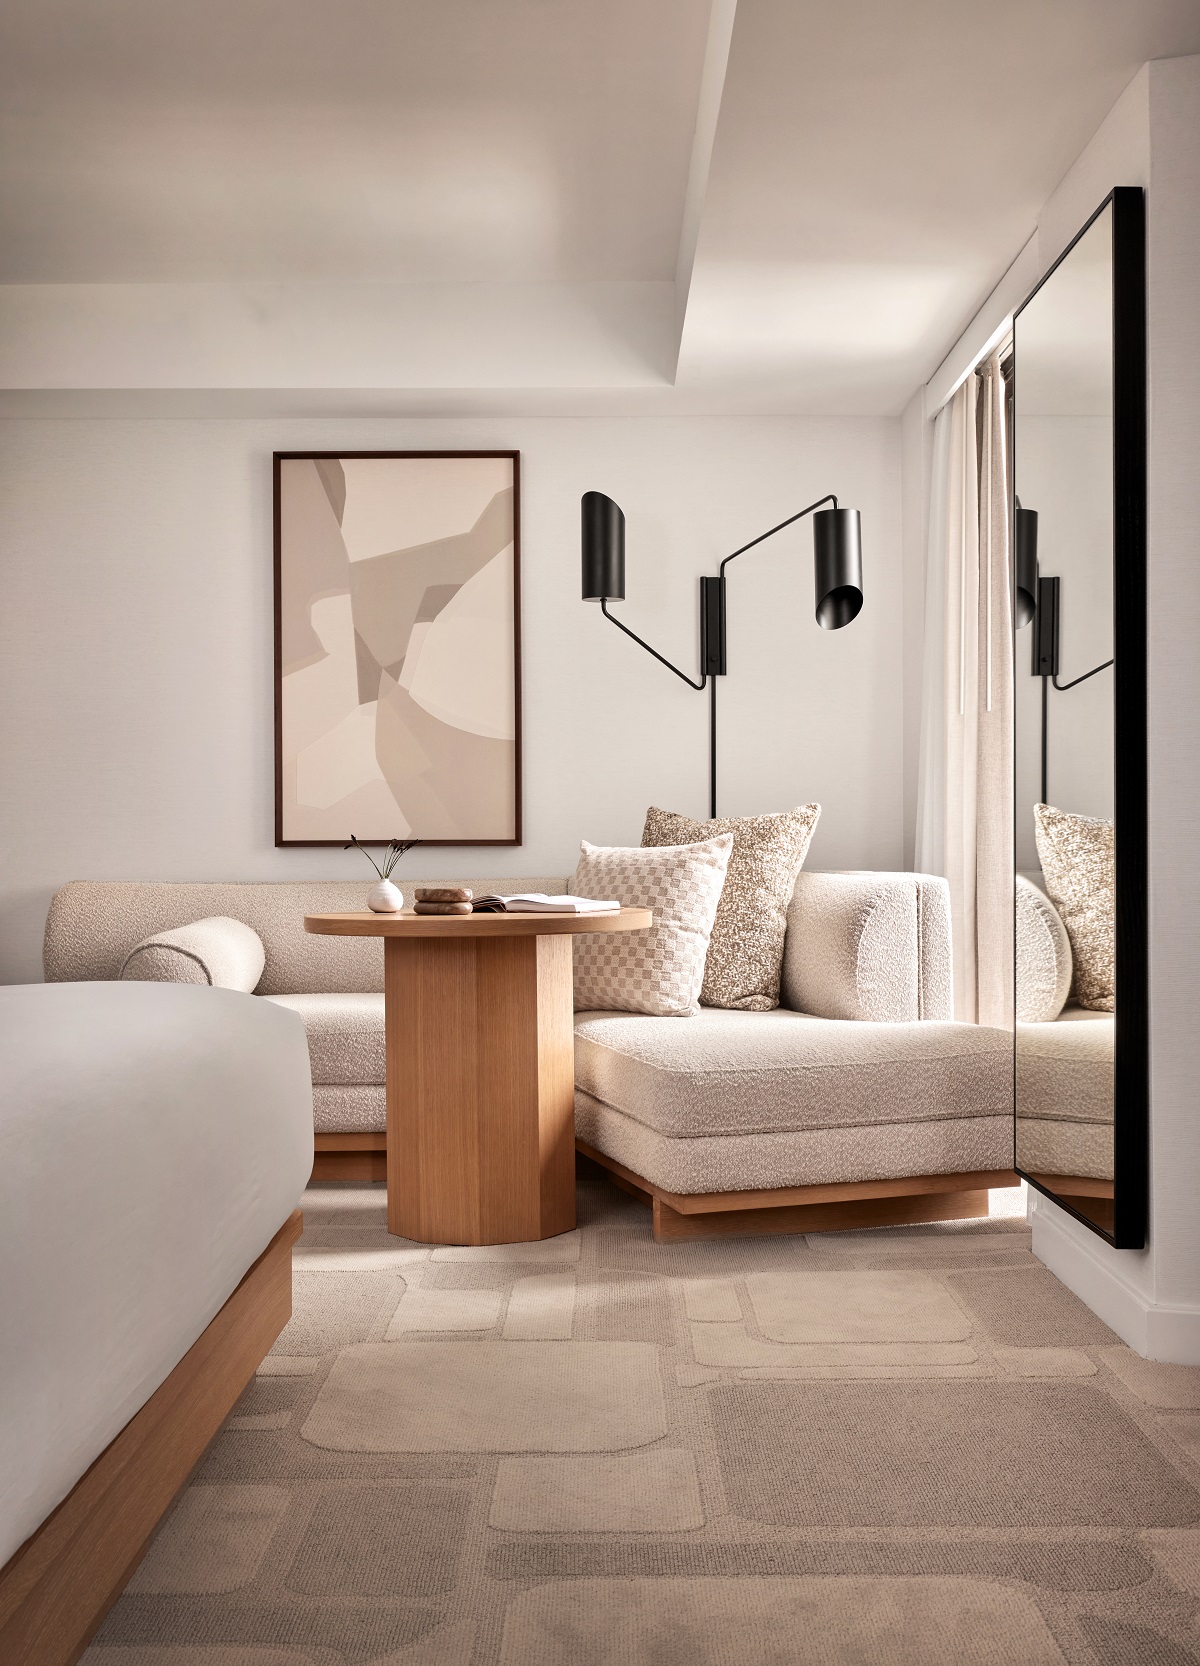 shades and textures of wood, cream and brown in the hotel guestrooms